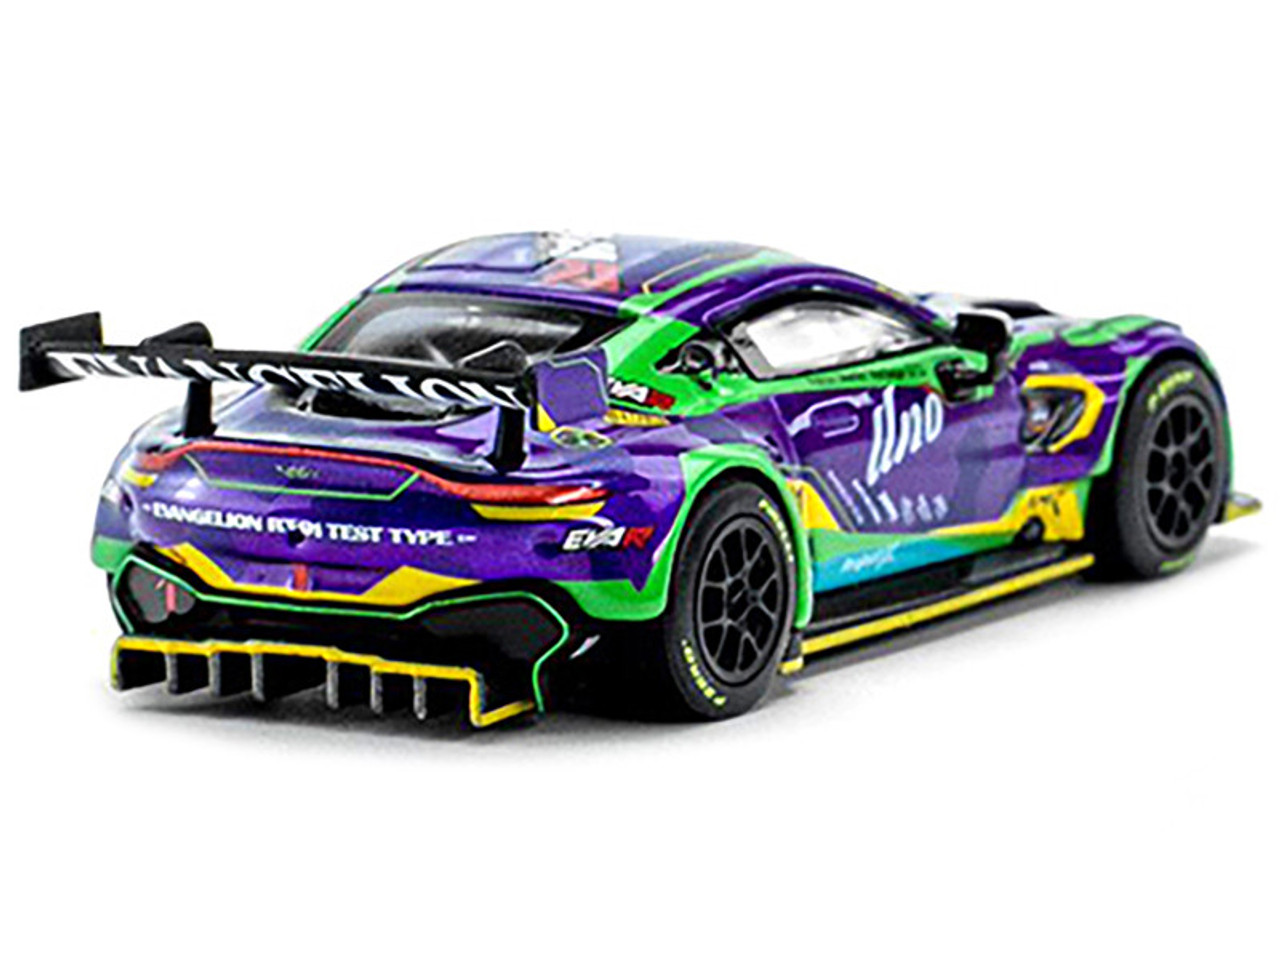 Aston Martin GT3 RHD (Right Hand Drive) "EVA RT Test Type-01" Purple with Graphics 1/64 Diecast Model Car by Pop Race